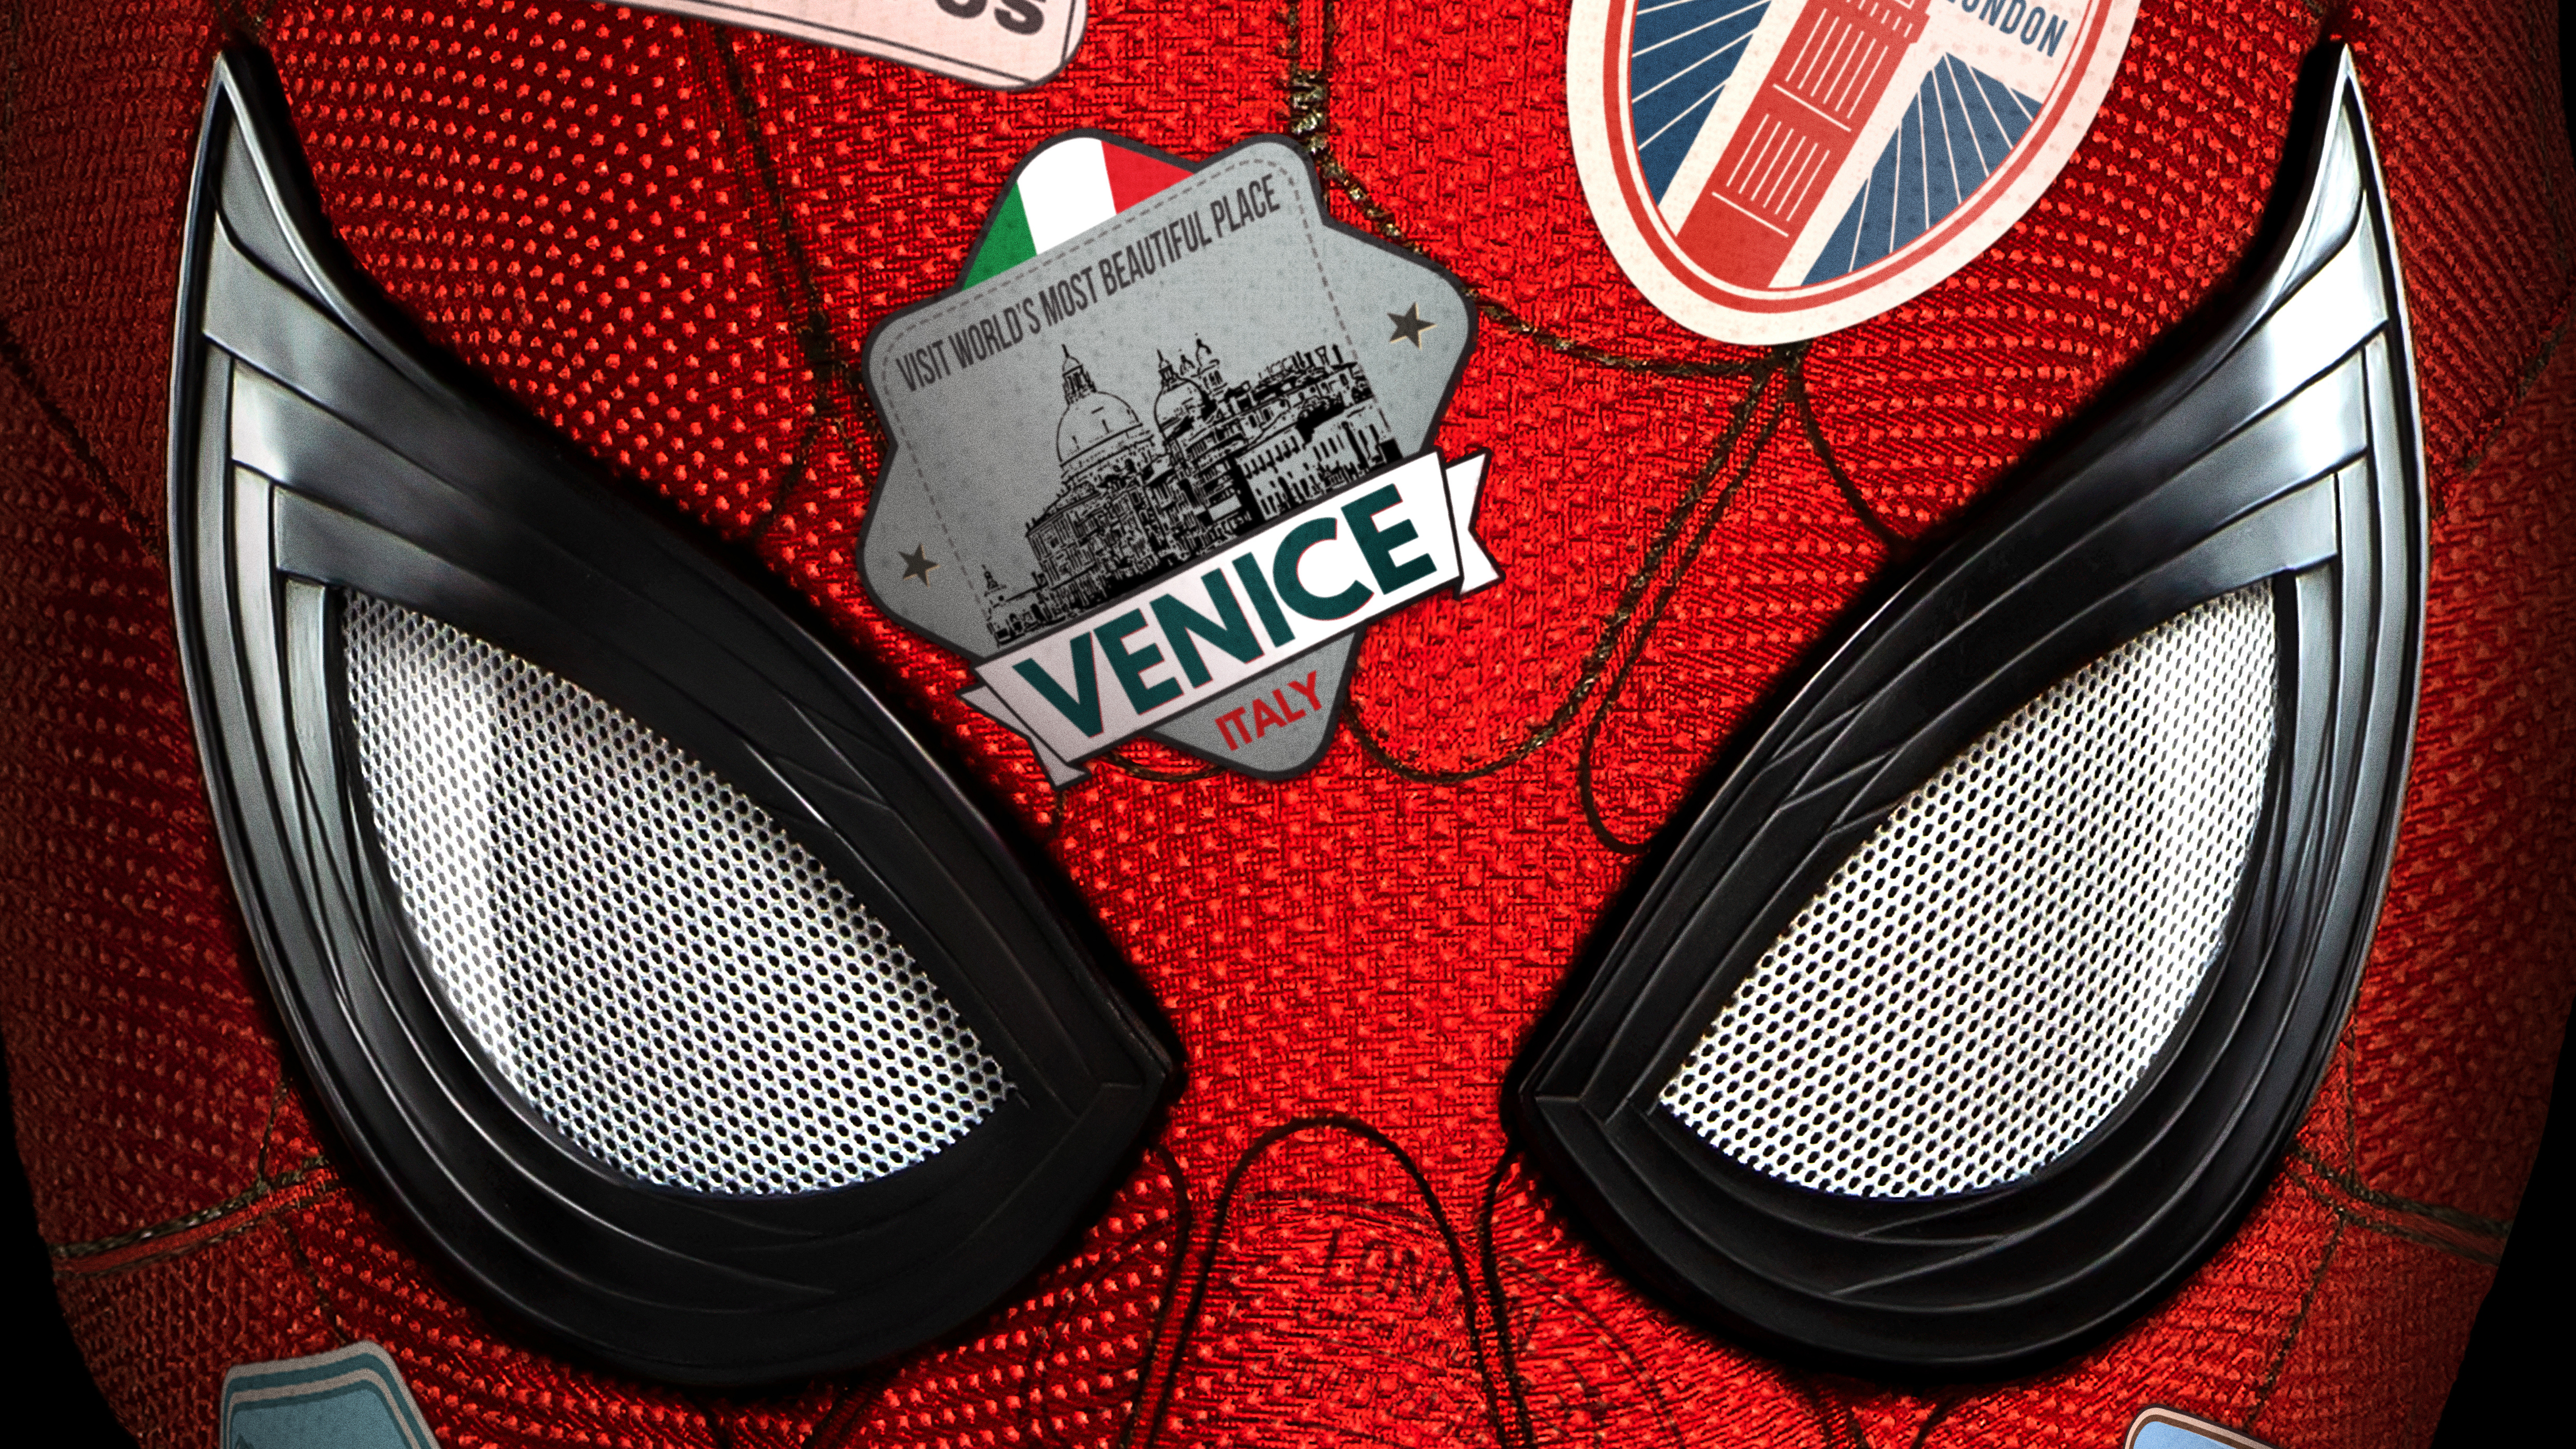 free for apple download Spider-Man: Far From Home